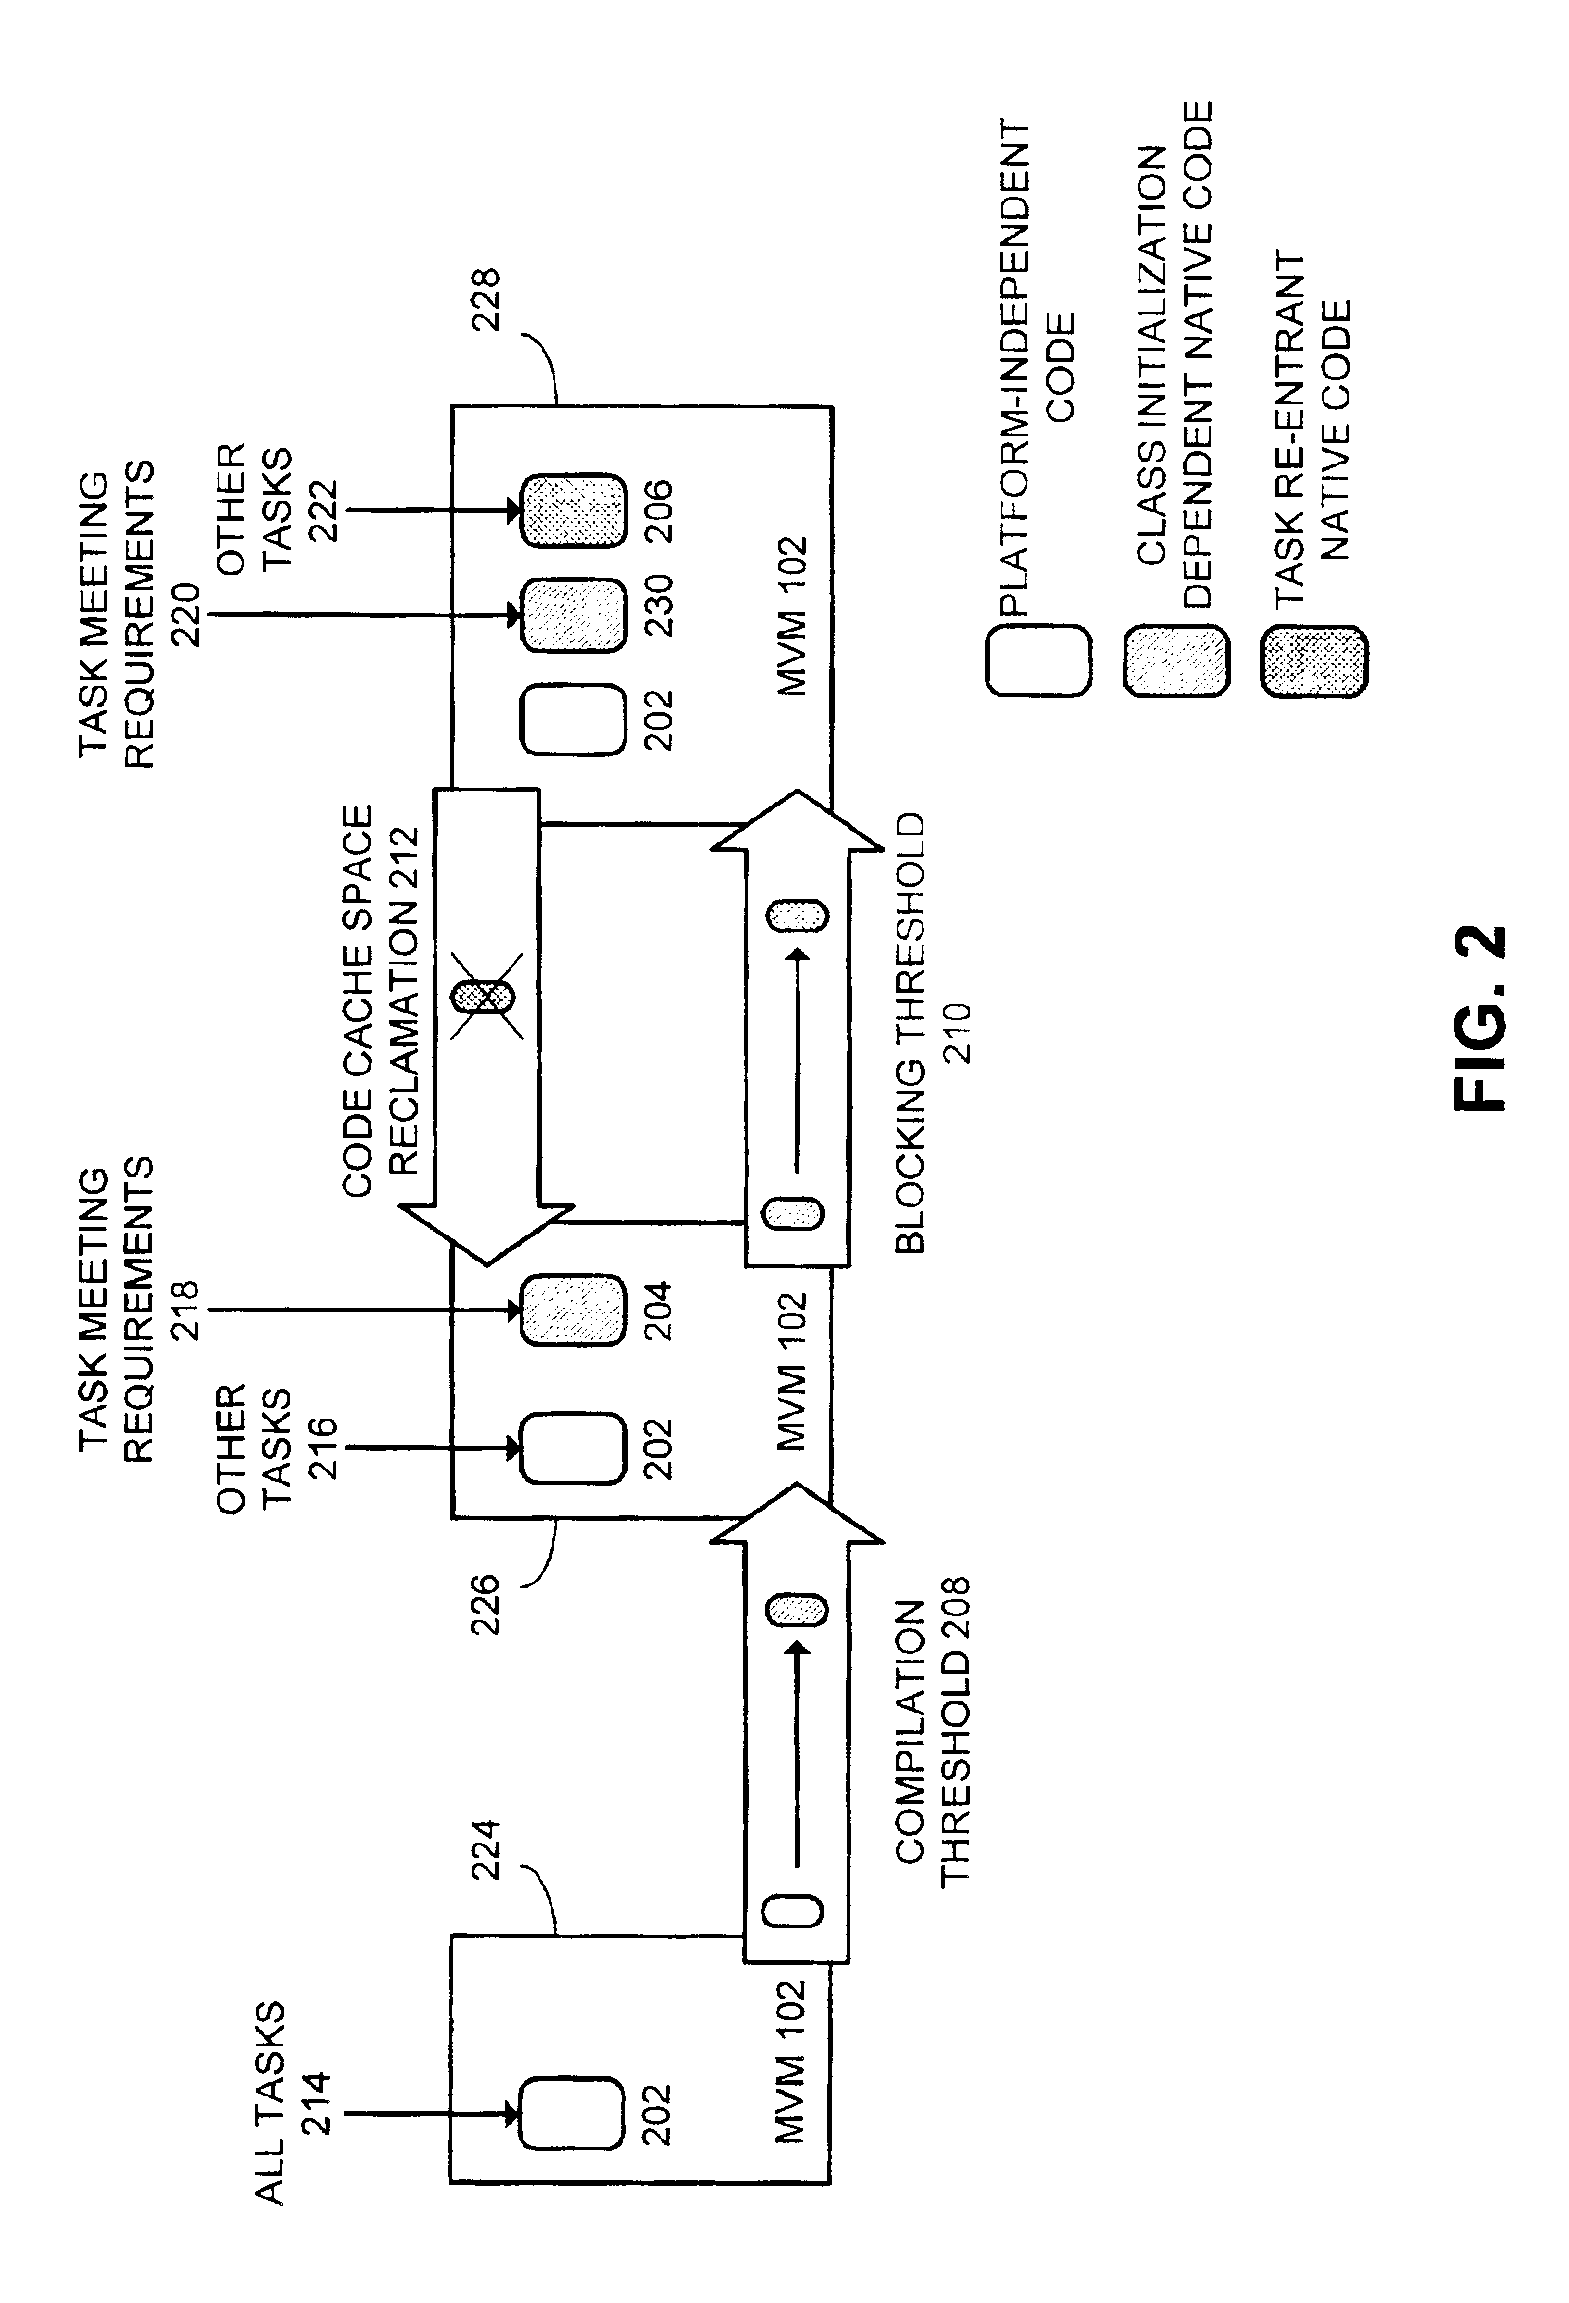 Method and apparatus to facilitate sharing optimized instruction code in a multitasking virtual machine